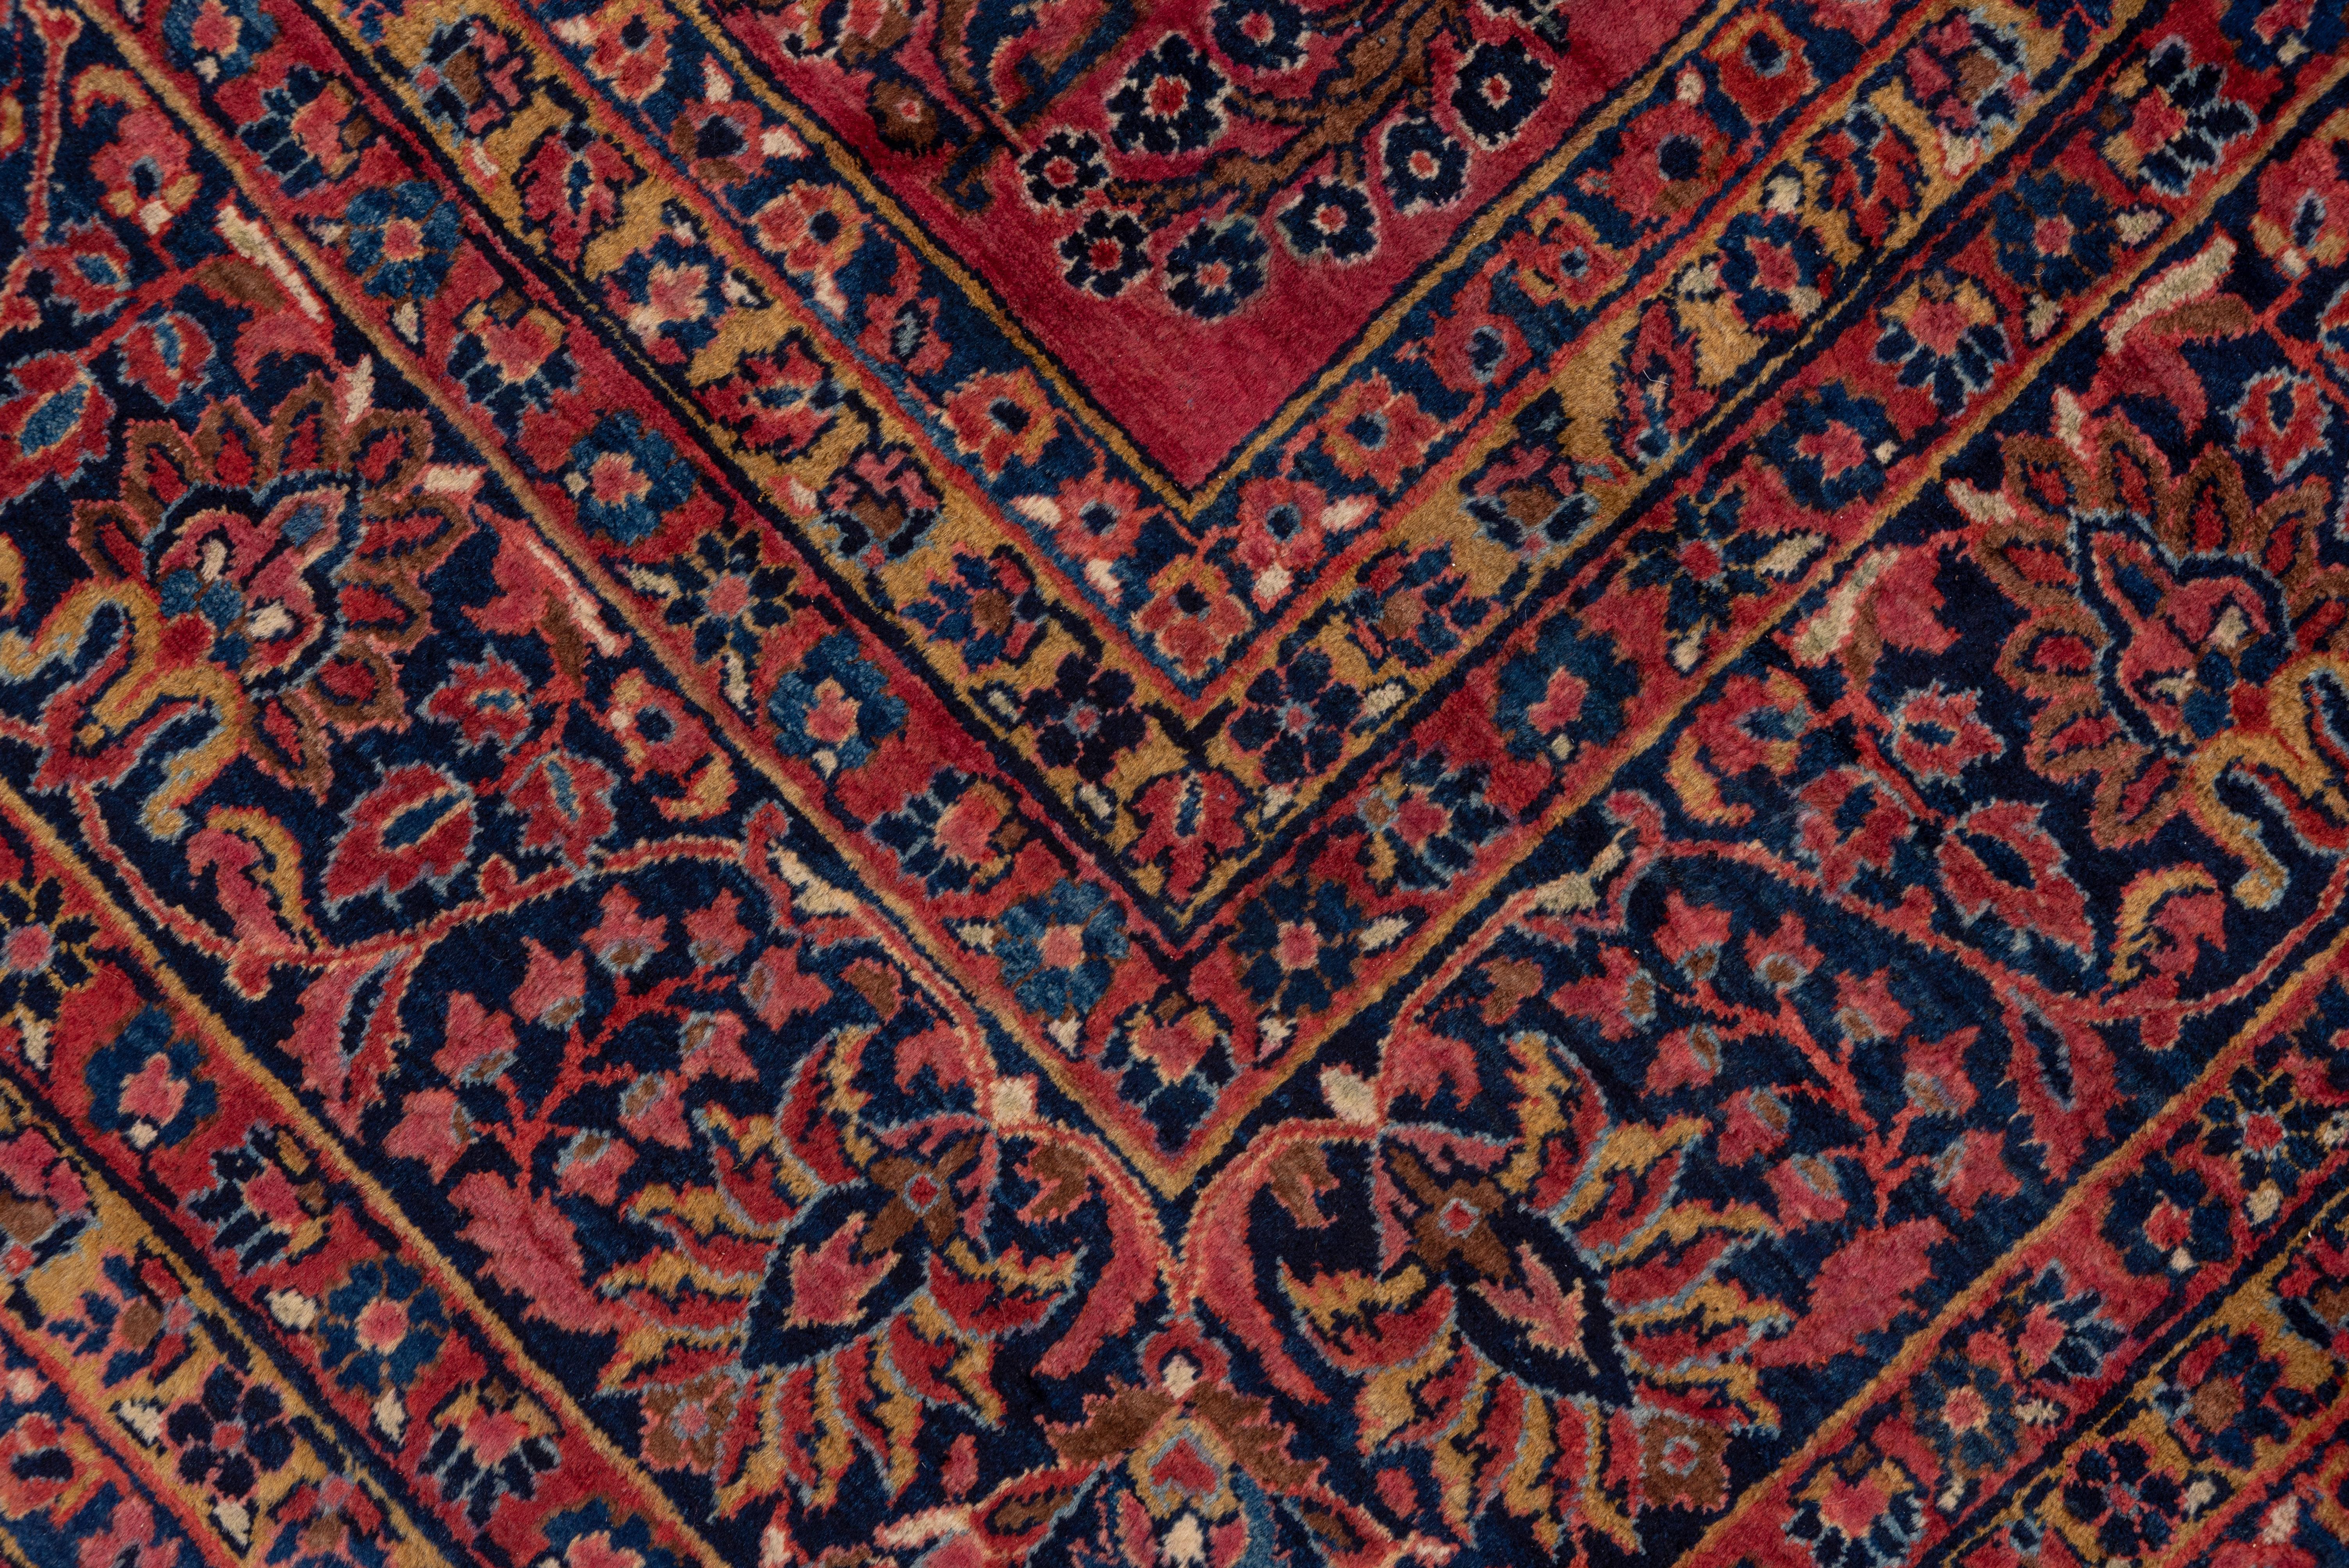 Early 20th Century Antique Persian Sarouk Rug, Bright Red Field, Gold and Blue Accents, Medium Pile For Sale